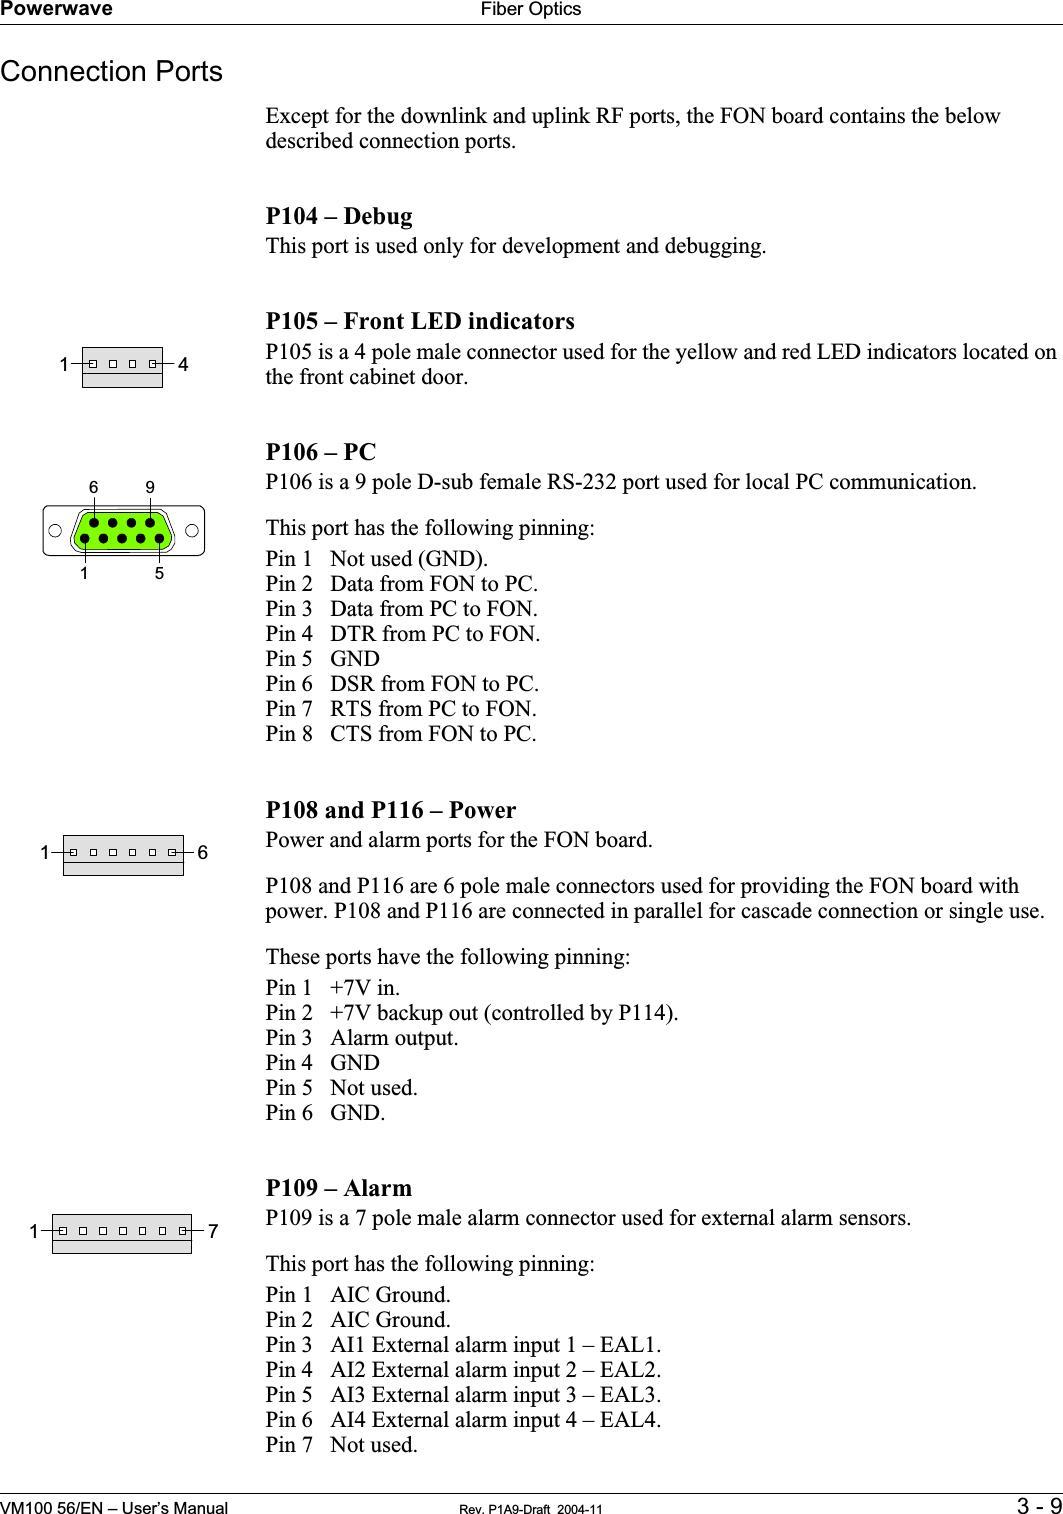 Powerwave Fiber OpticsVM100 56/EN – User’s Manual Rev. P1A9-Draft  2004-11 3 - 9Connection PortsExcept for the downlink and uplink RF ports, the FON board contains the below described connection ports.P104 – DebugThis port is used only for development and debugging.P105 – Front LED indicatorsP105 is a 4 pole male connector used for the yellow and red LED indicators located on the front cabinet door.P106 – PC   P106 is a 9 pole D-sub female RS-232 port used for local PC communication.This port has the following pinning:Pin 1 Not used (GND).Pin 2 Data from FON to PC.Pin 3 Data from PC to FON.Pin 4 DTR from PC to FON.Pin 5 GNDPin 6 DSR from FON to PC.Pin 7 RTS from PC to FON.Pin 8 CTS from FON to PC.P108 and P116 – Power   Power and alarm ports for the FON board.P108 and P116 are 6 pole male connectors used for providing the FON board with power. P108 and P116 are connected in parallel for cascade connection or single use.These ports have the following pinning:Pin 1 +7V in.Pin 2 +7V backup out (controlled by P114).Pin 3 Alarm output.Pin 4 GNDPin 5 Not used.Pin 6 GND.P109 – AlarmP109 is a 7 pole male alarm connector used for external alarm sensors.This port has the following pinning:Pin 1 AIC Ground.Pin 2 AIC Ground.Pin 3 AI1 External alarm input 1 – EAL1.Pin 4 AI2 External alarm input 2 – EAL2.Pin 5 AI3 External alarm input 3 – EAL3.Pin 6 AI4 External alarm input 4 – EAL4.Pin 7 Not used.14516 91617